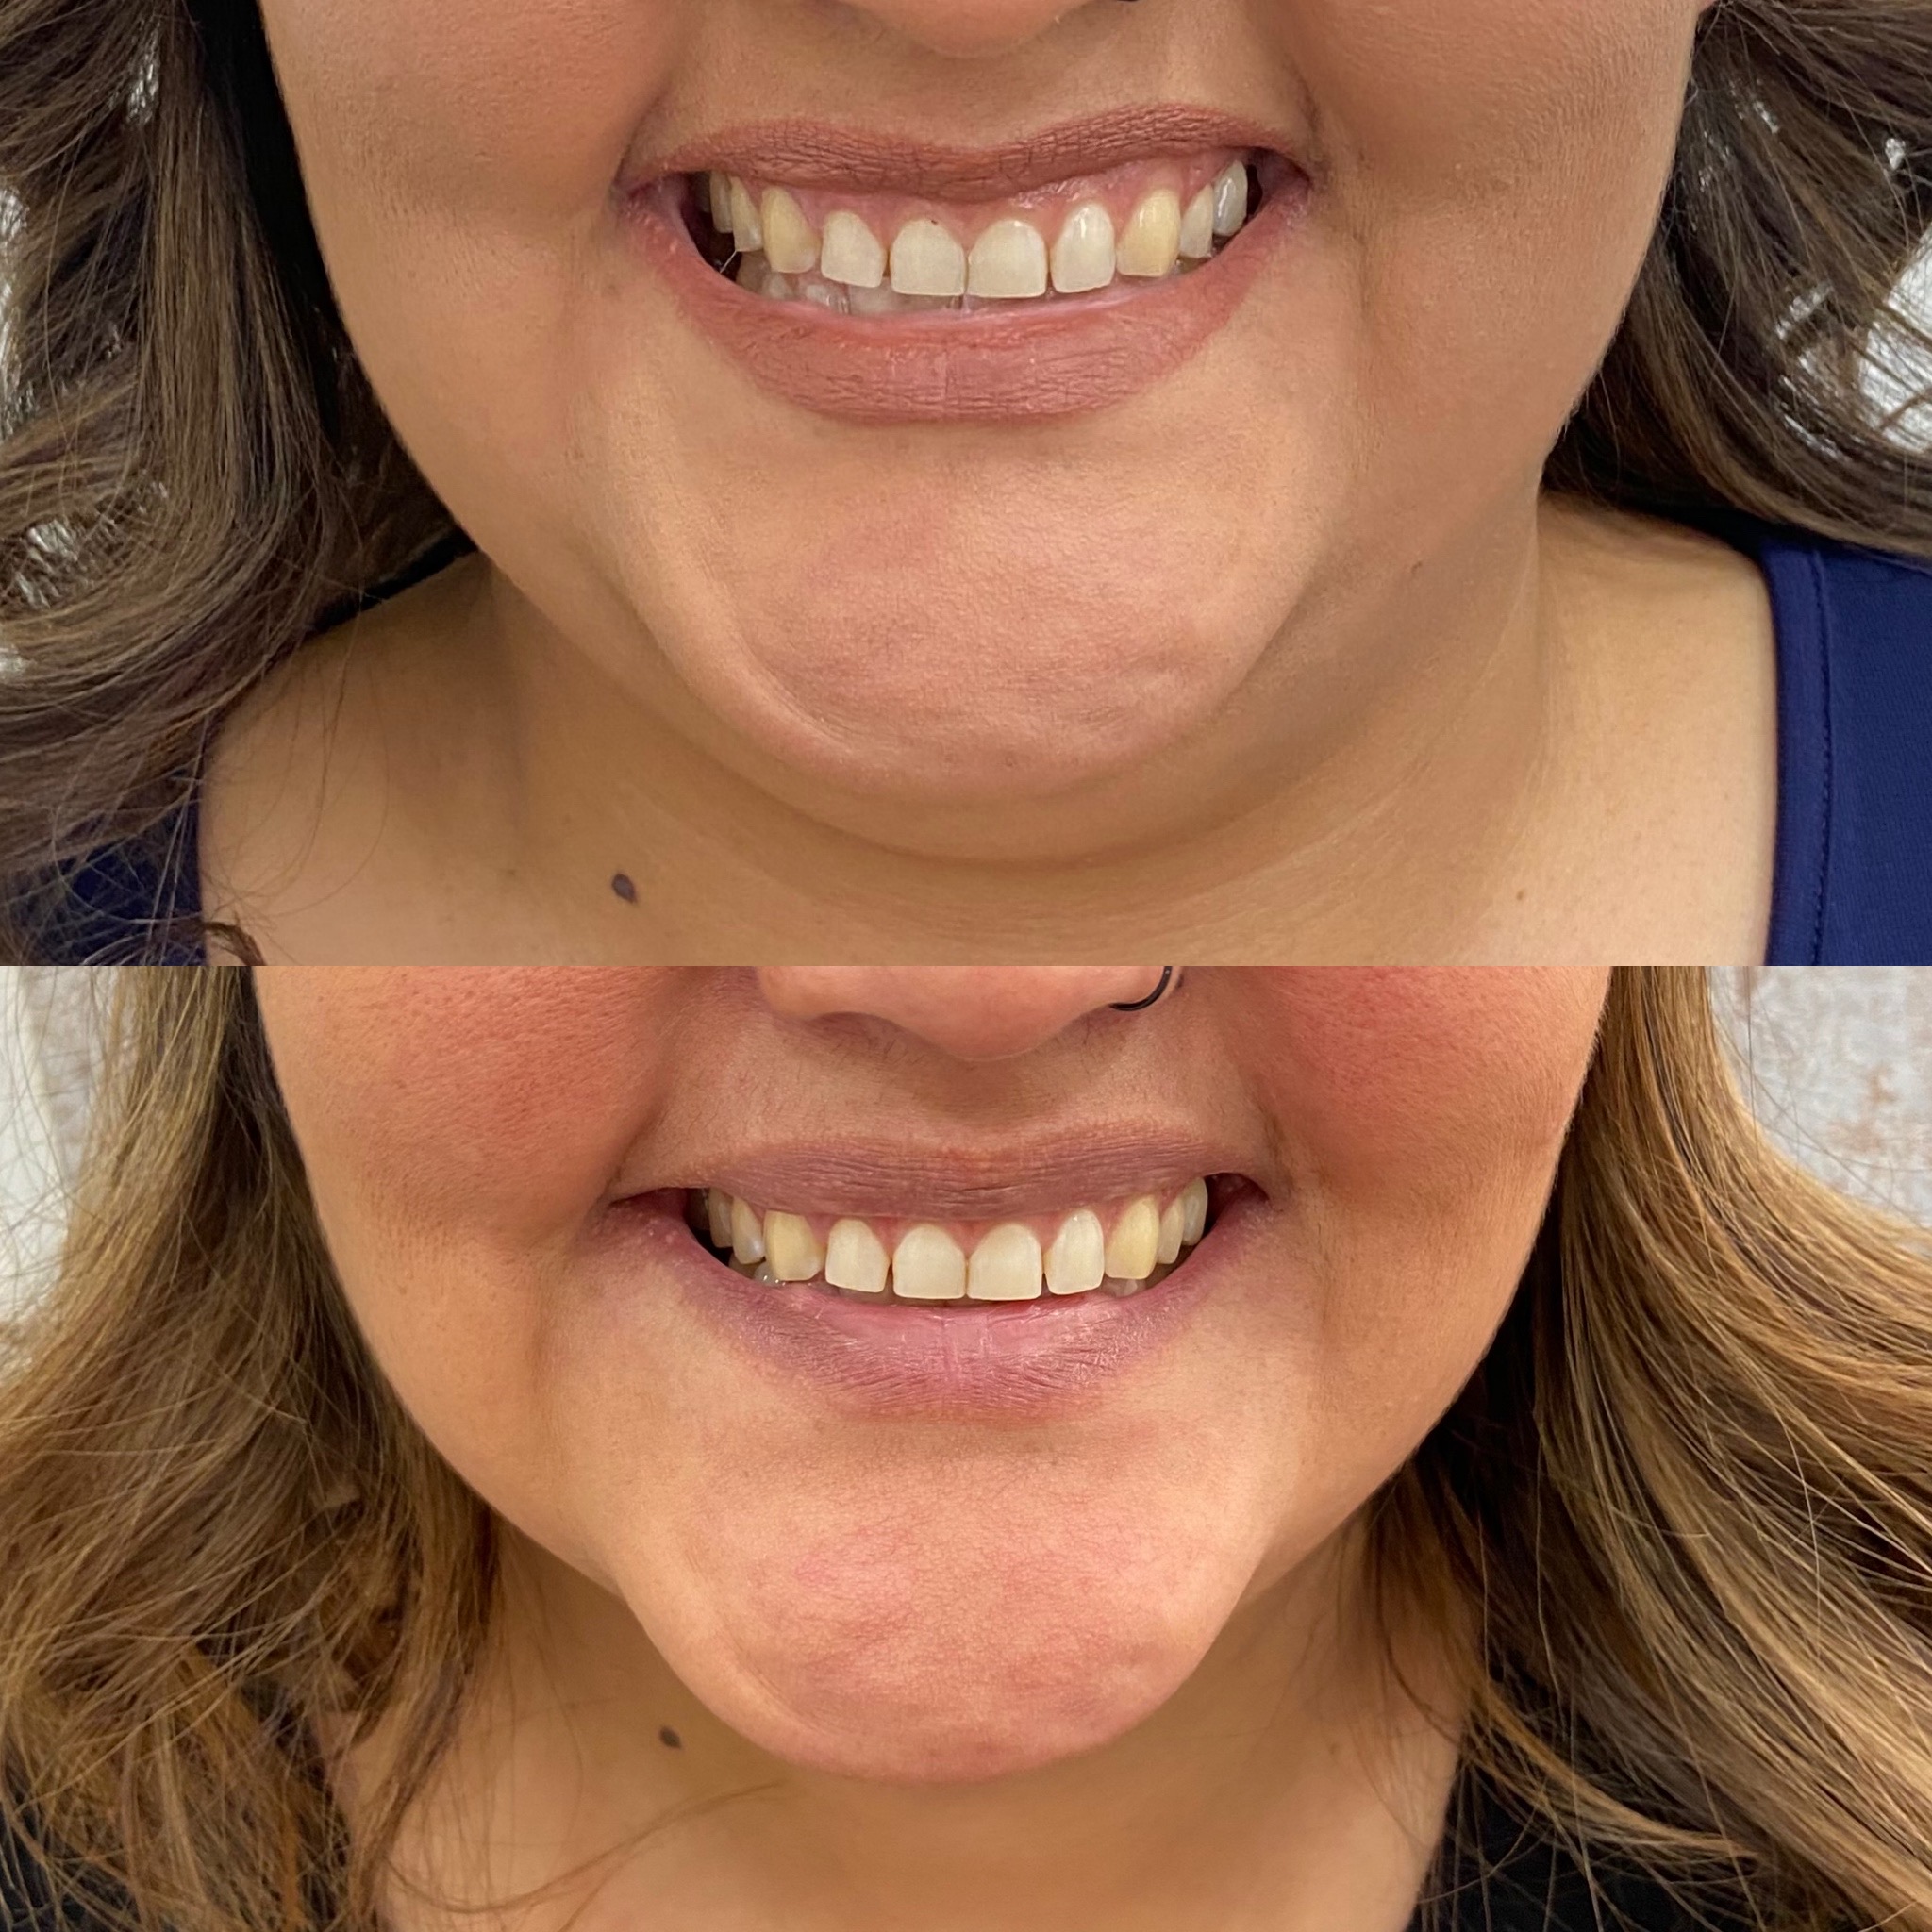 Before and After Lip lines flip Treatment | Beauty Boost Med Spa in Newport Beach, CA